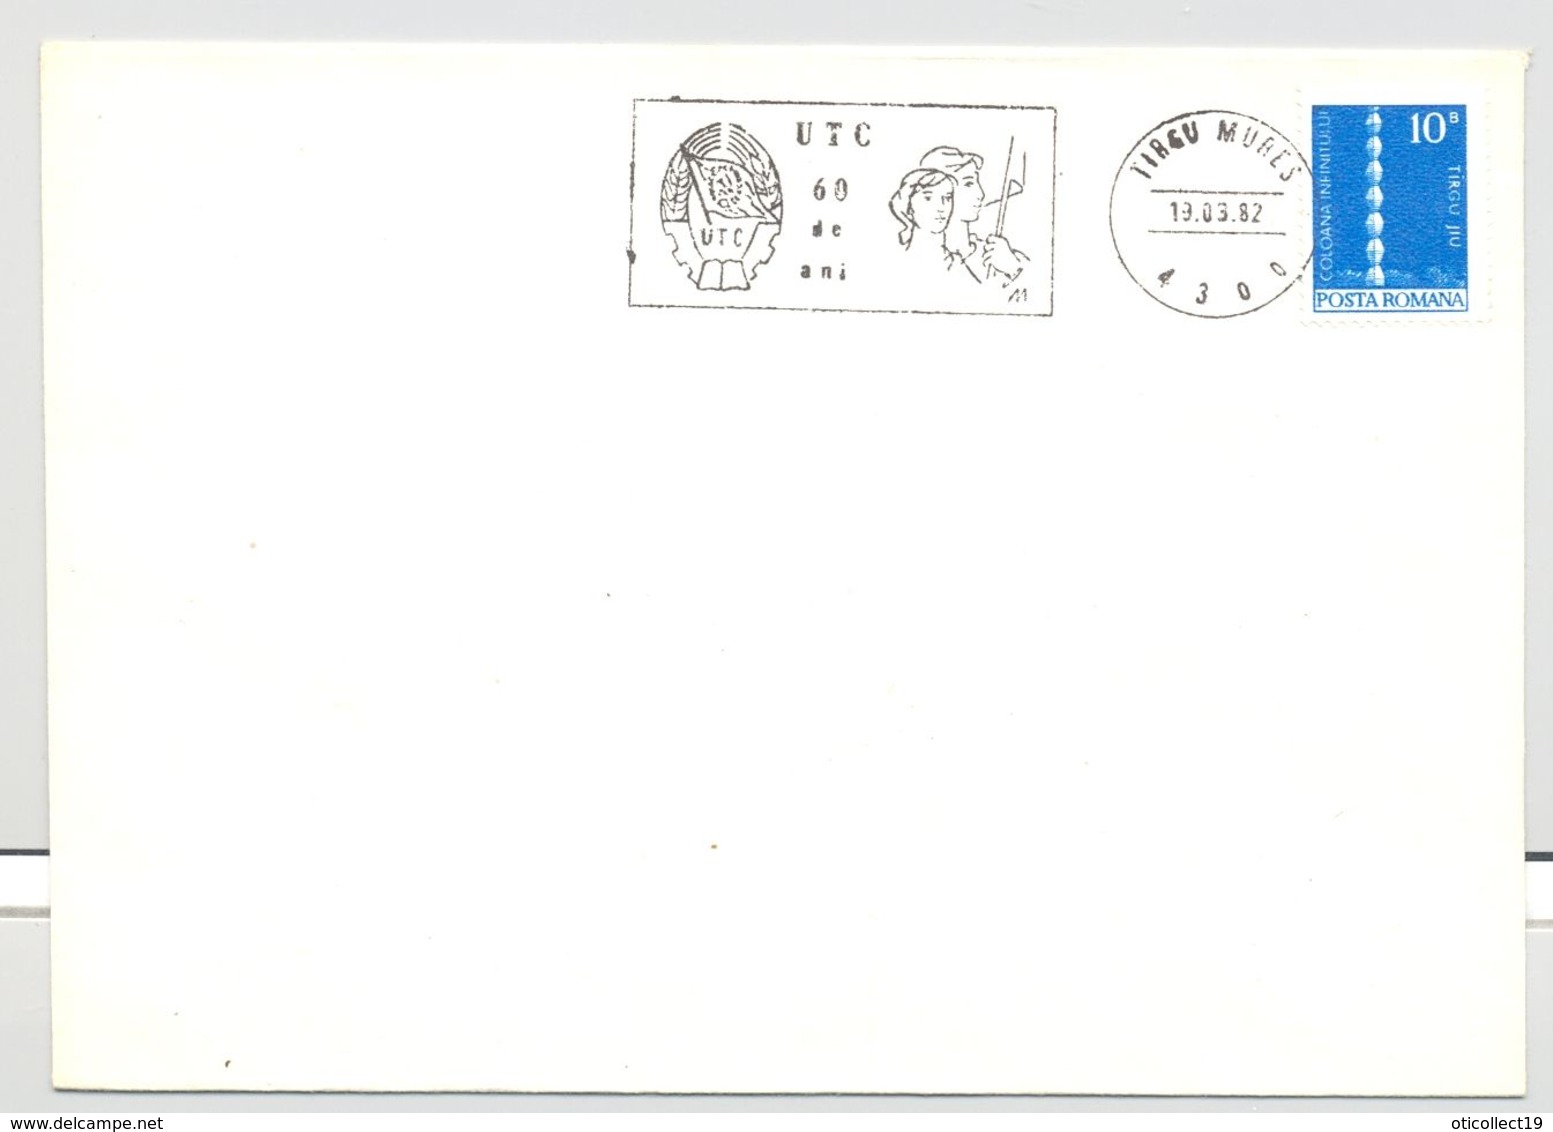 ROMANIAN YOUTH COMMUNIST ORGANIZATION ANNIVERSARY, SPECIAL POSTMARK ON COVER, ENDLESS COLUMN STAMP, 1982, ROMANIA - Covers & Documents